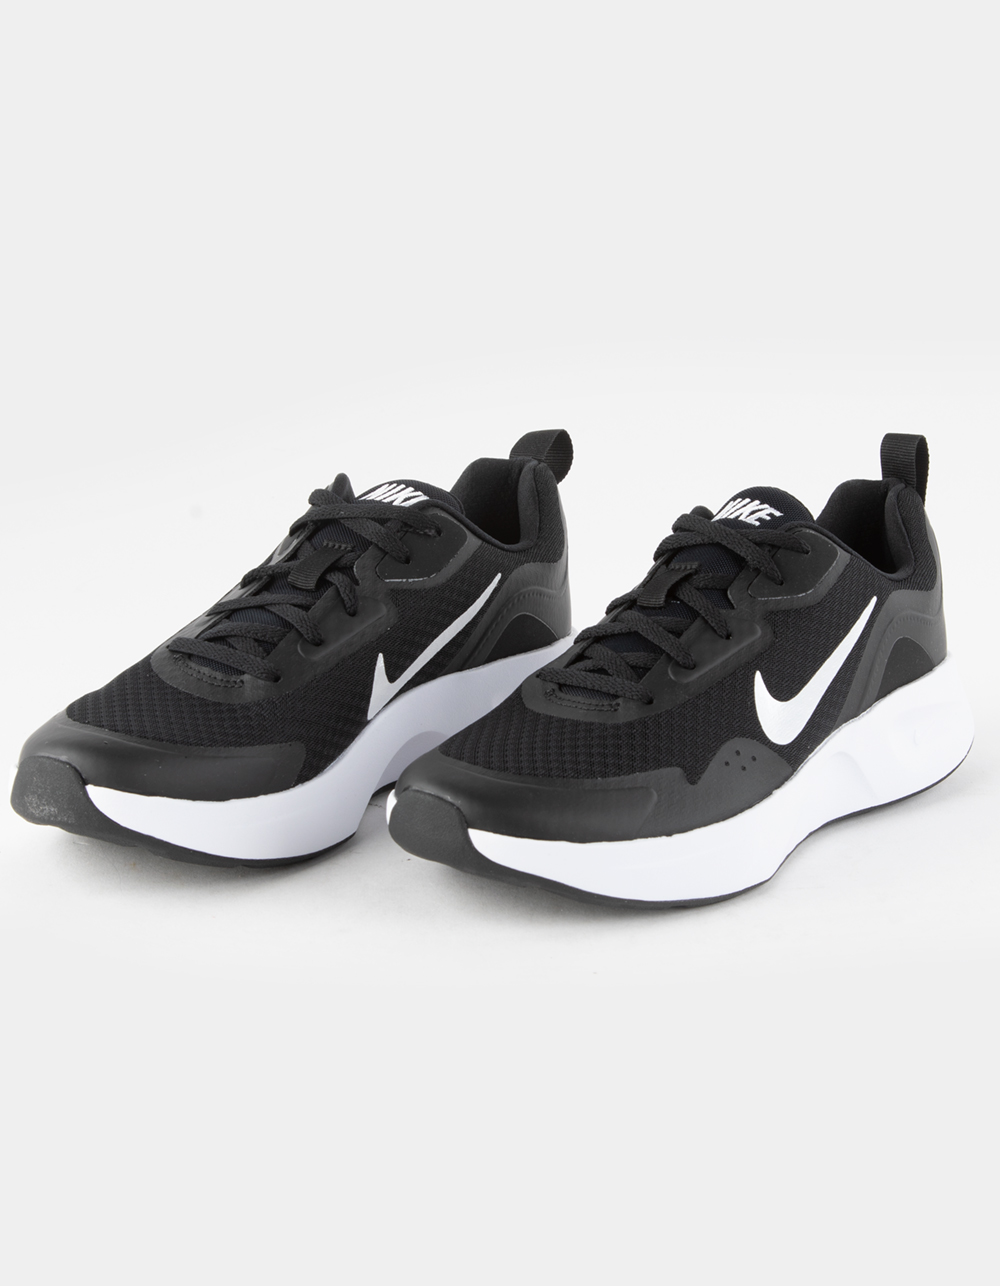 NIKE Wearallday Womens Shoes BLK/WHT | Tillys